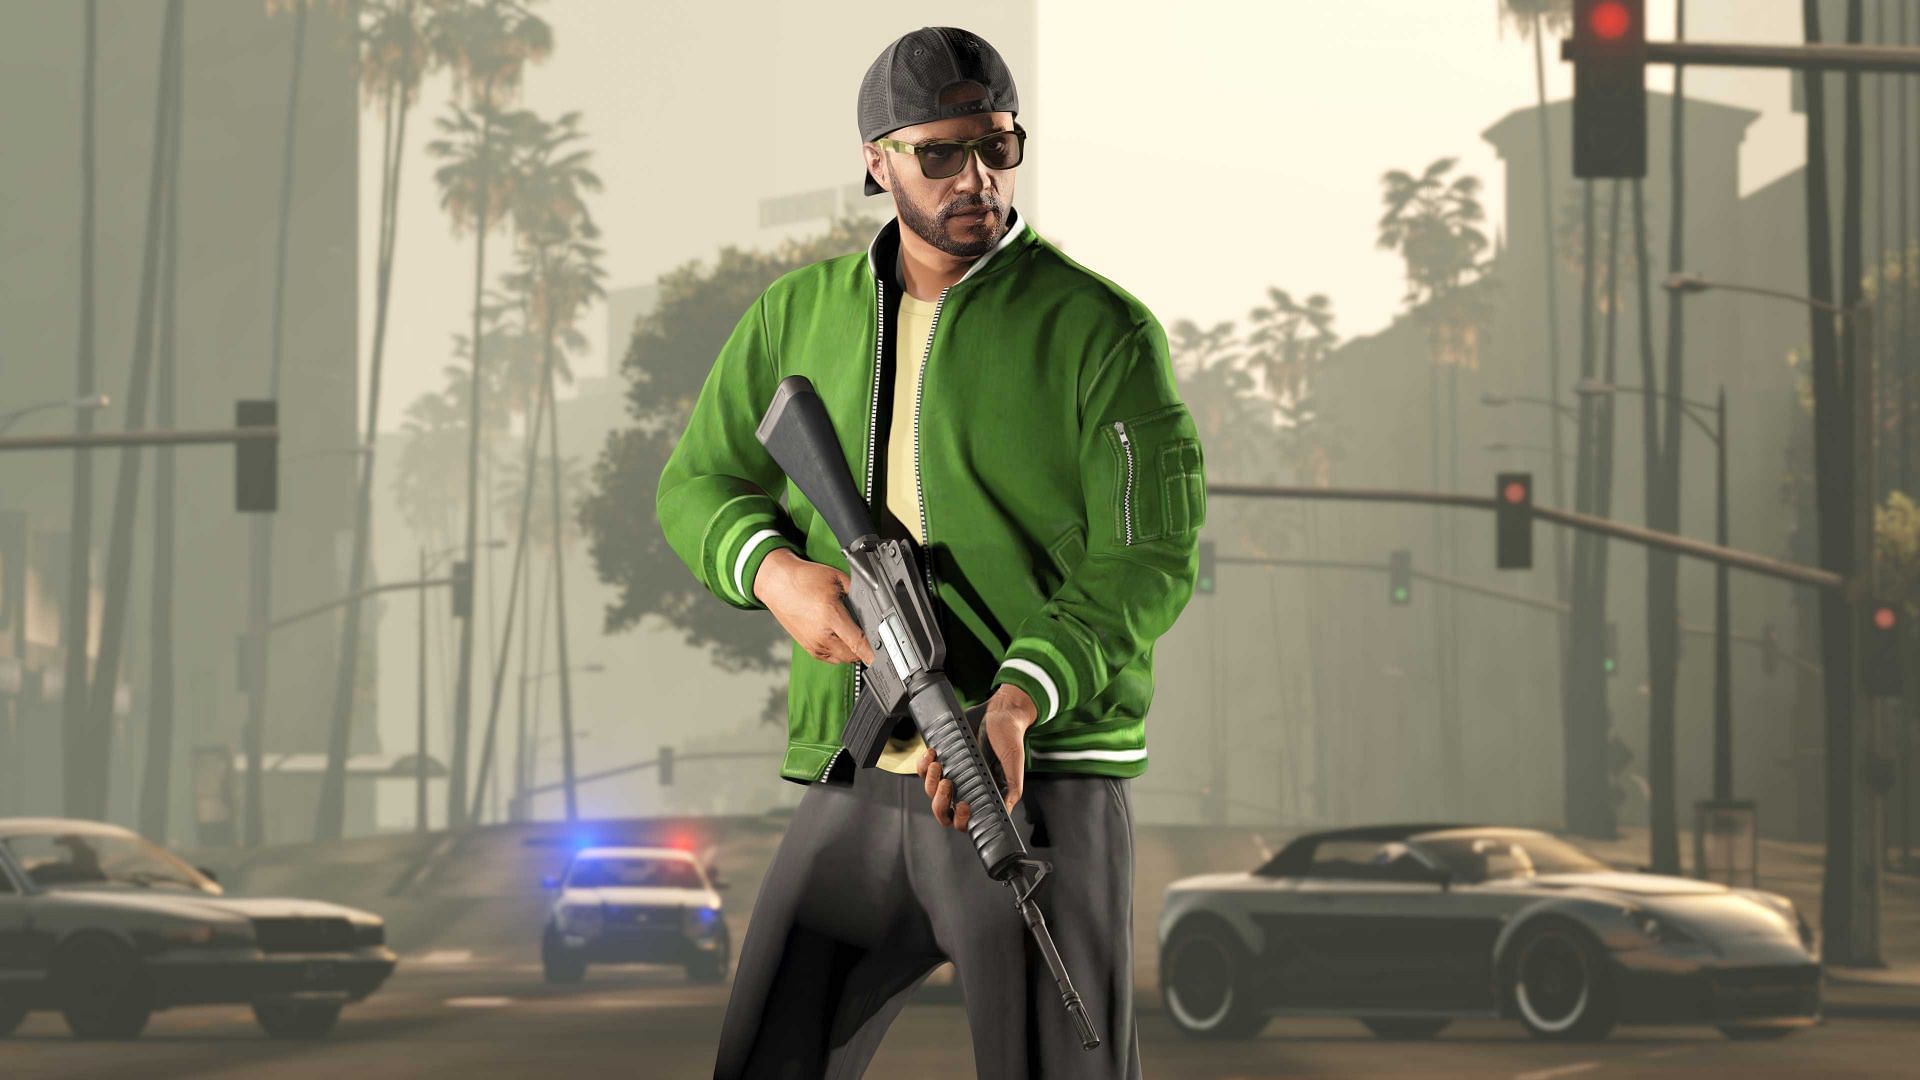 The promotional image associated with the gun